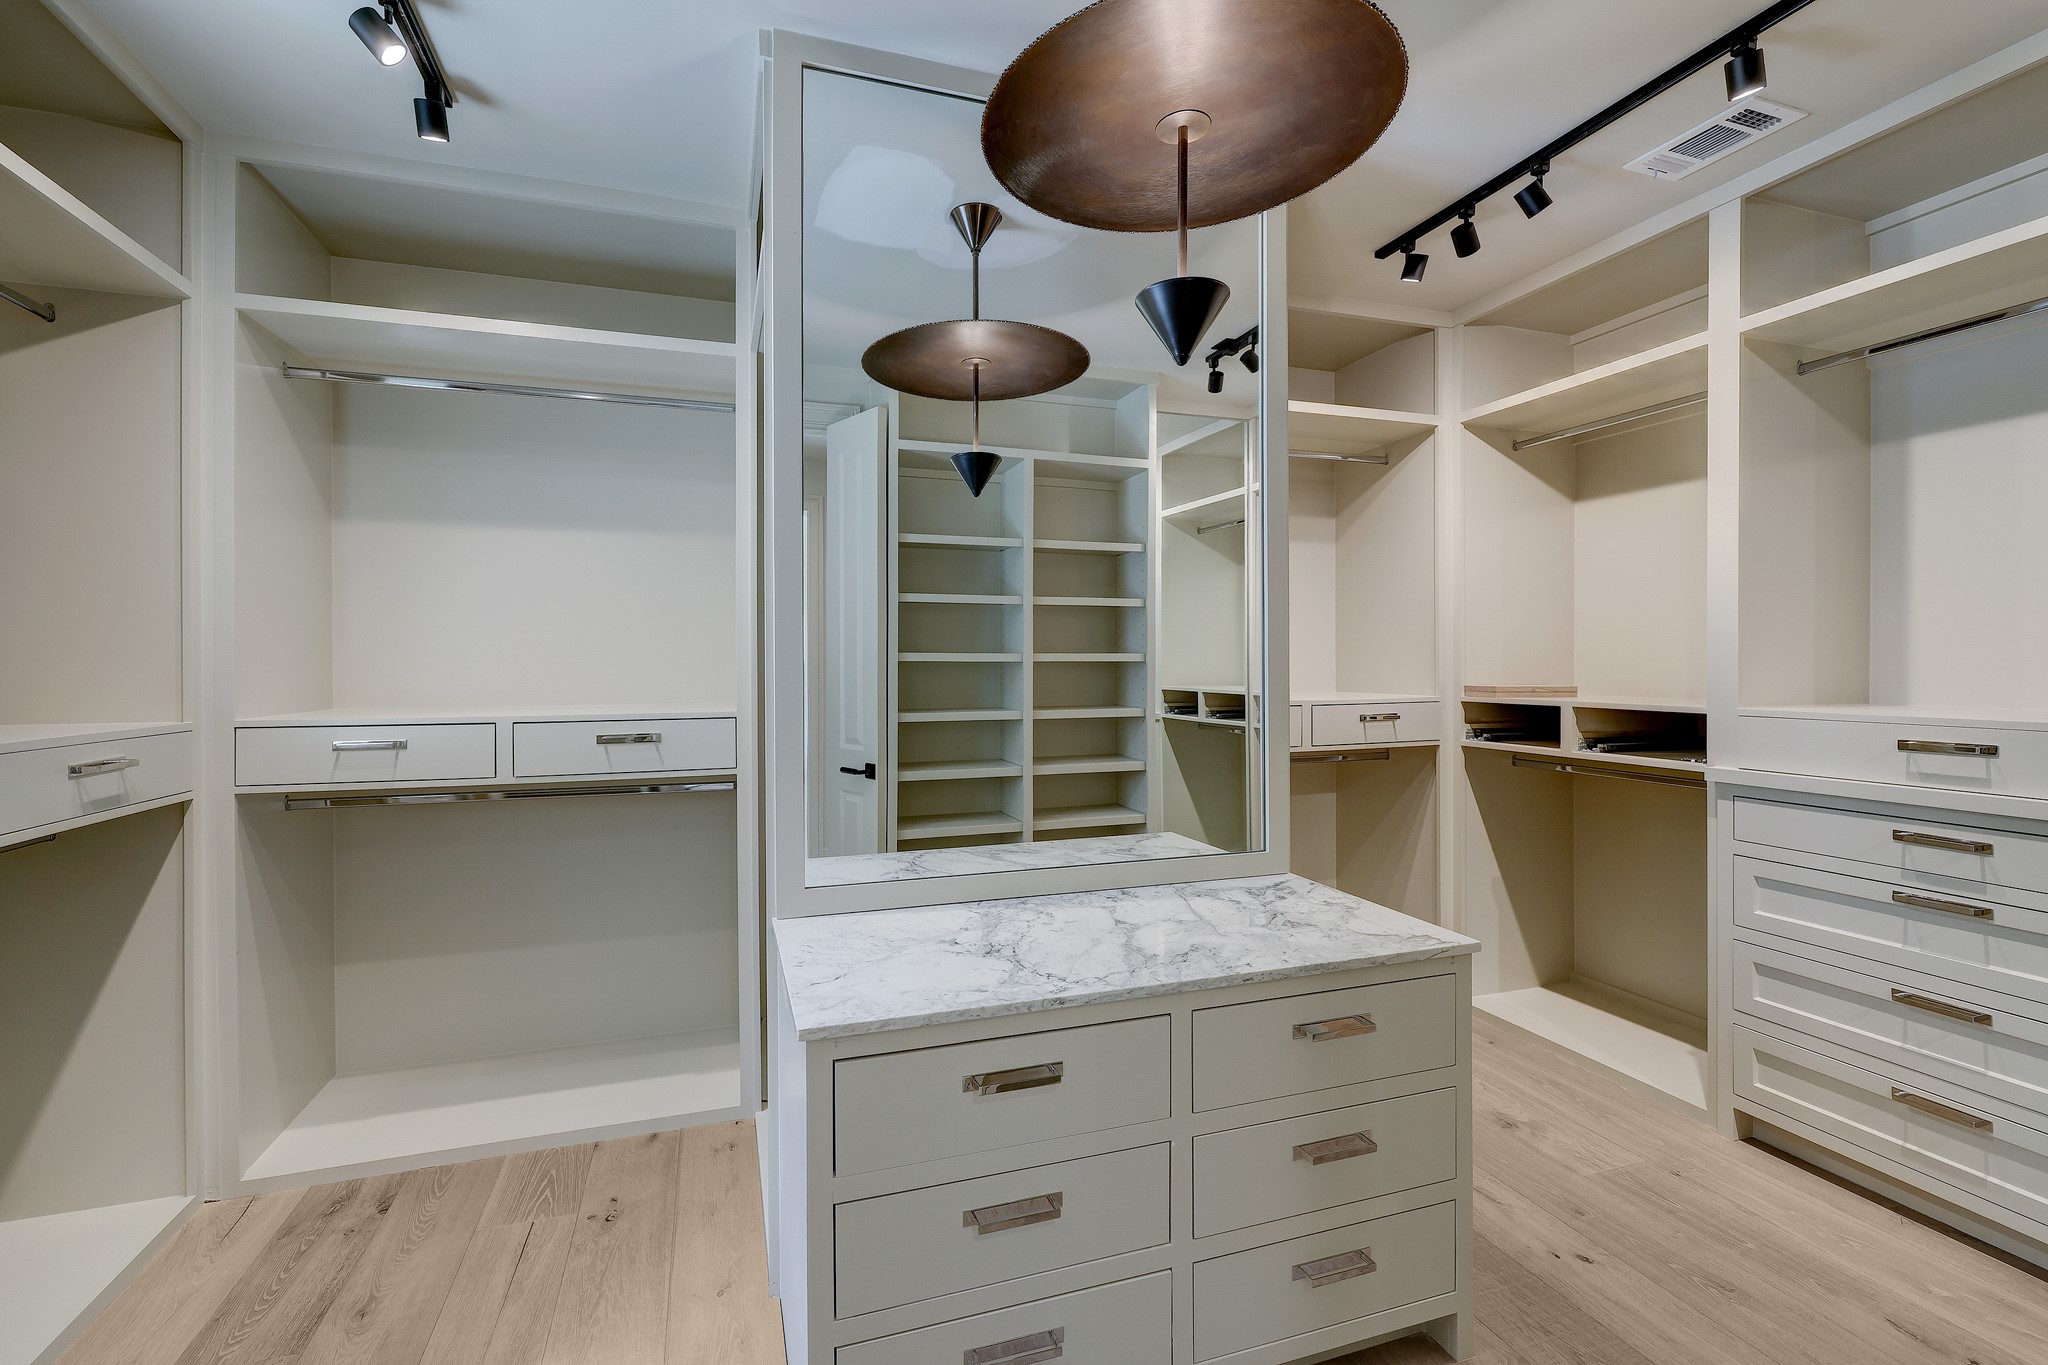 Walk-in closet with dual sides, custom built ins and packing island and mirror. Track lighting and designer pendant illuminate this fabulous space to get ready.